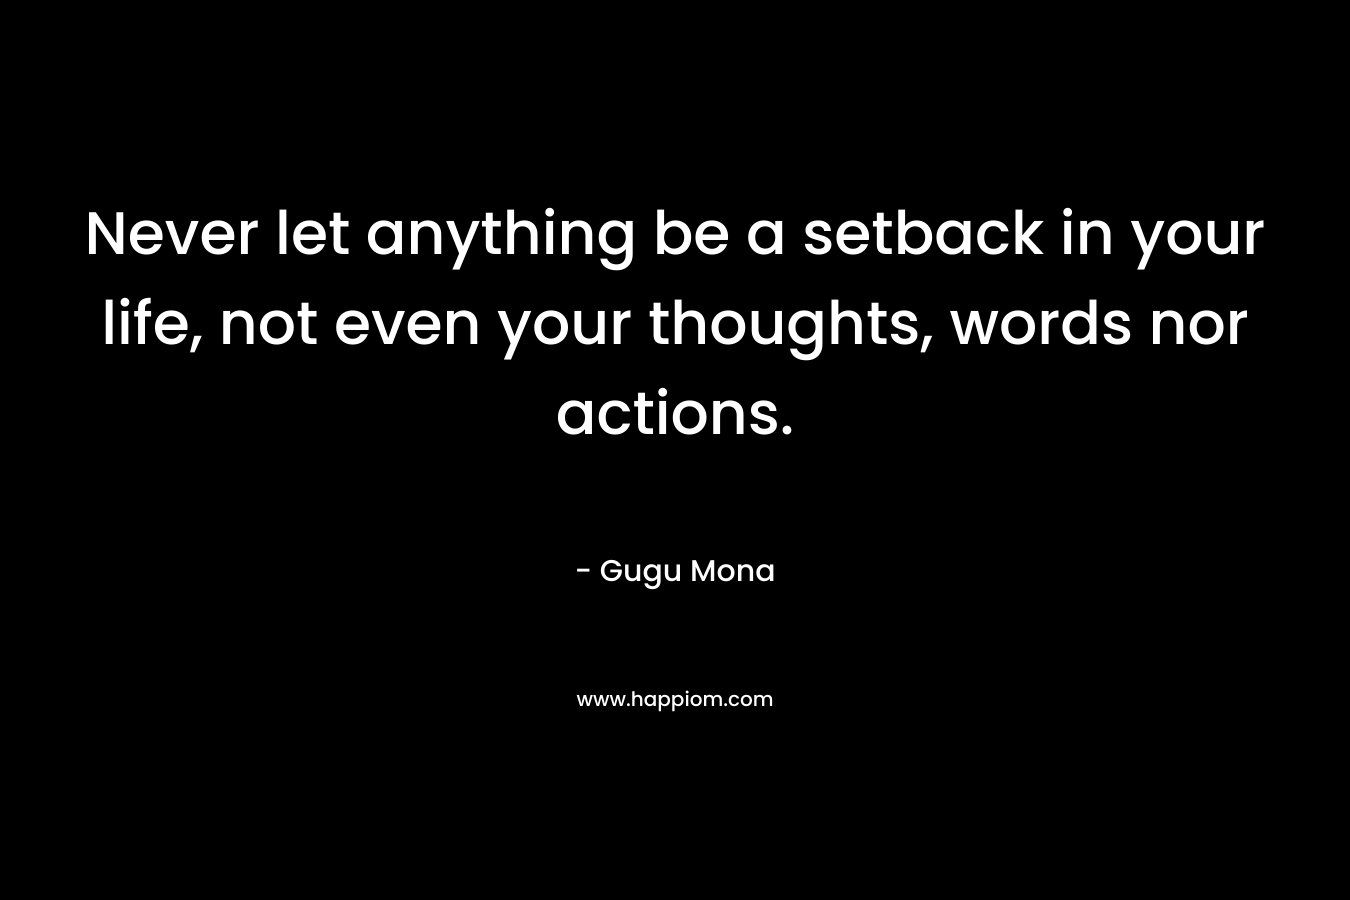 Never let anything be a setback in your life, not even your thoughts, words nor actions.